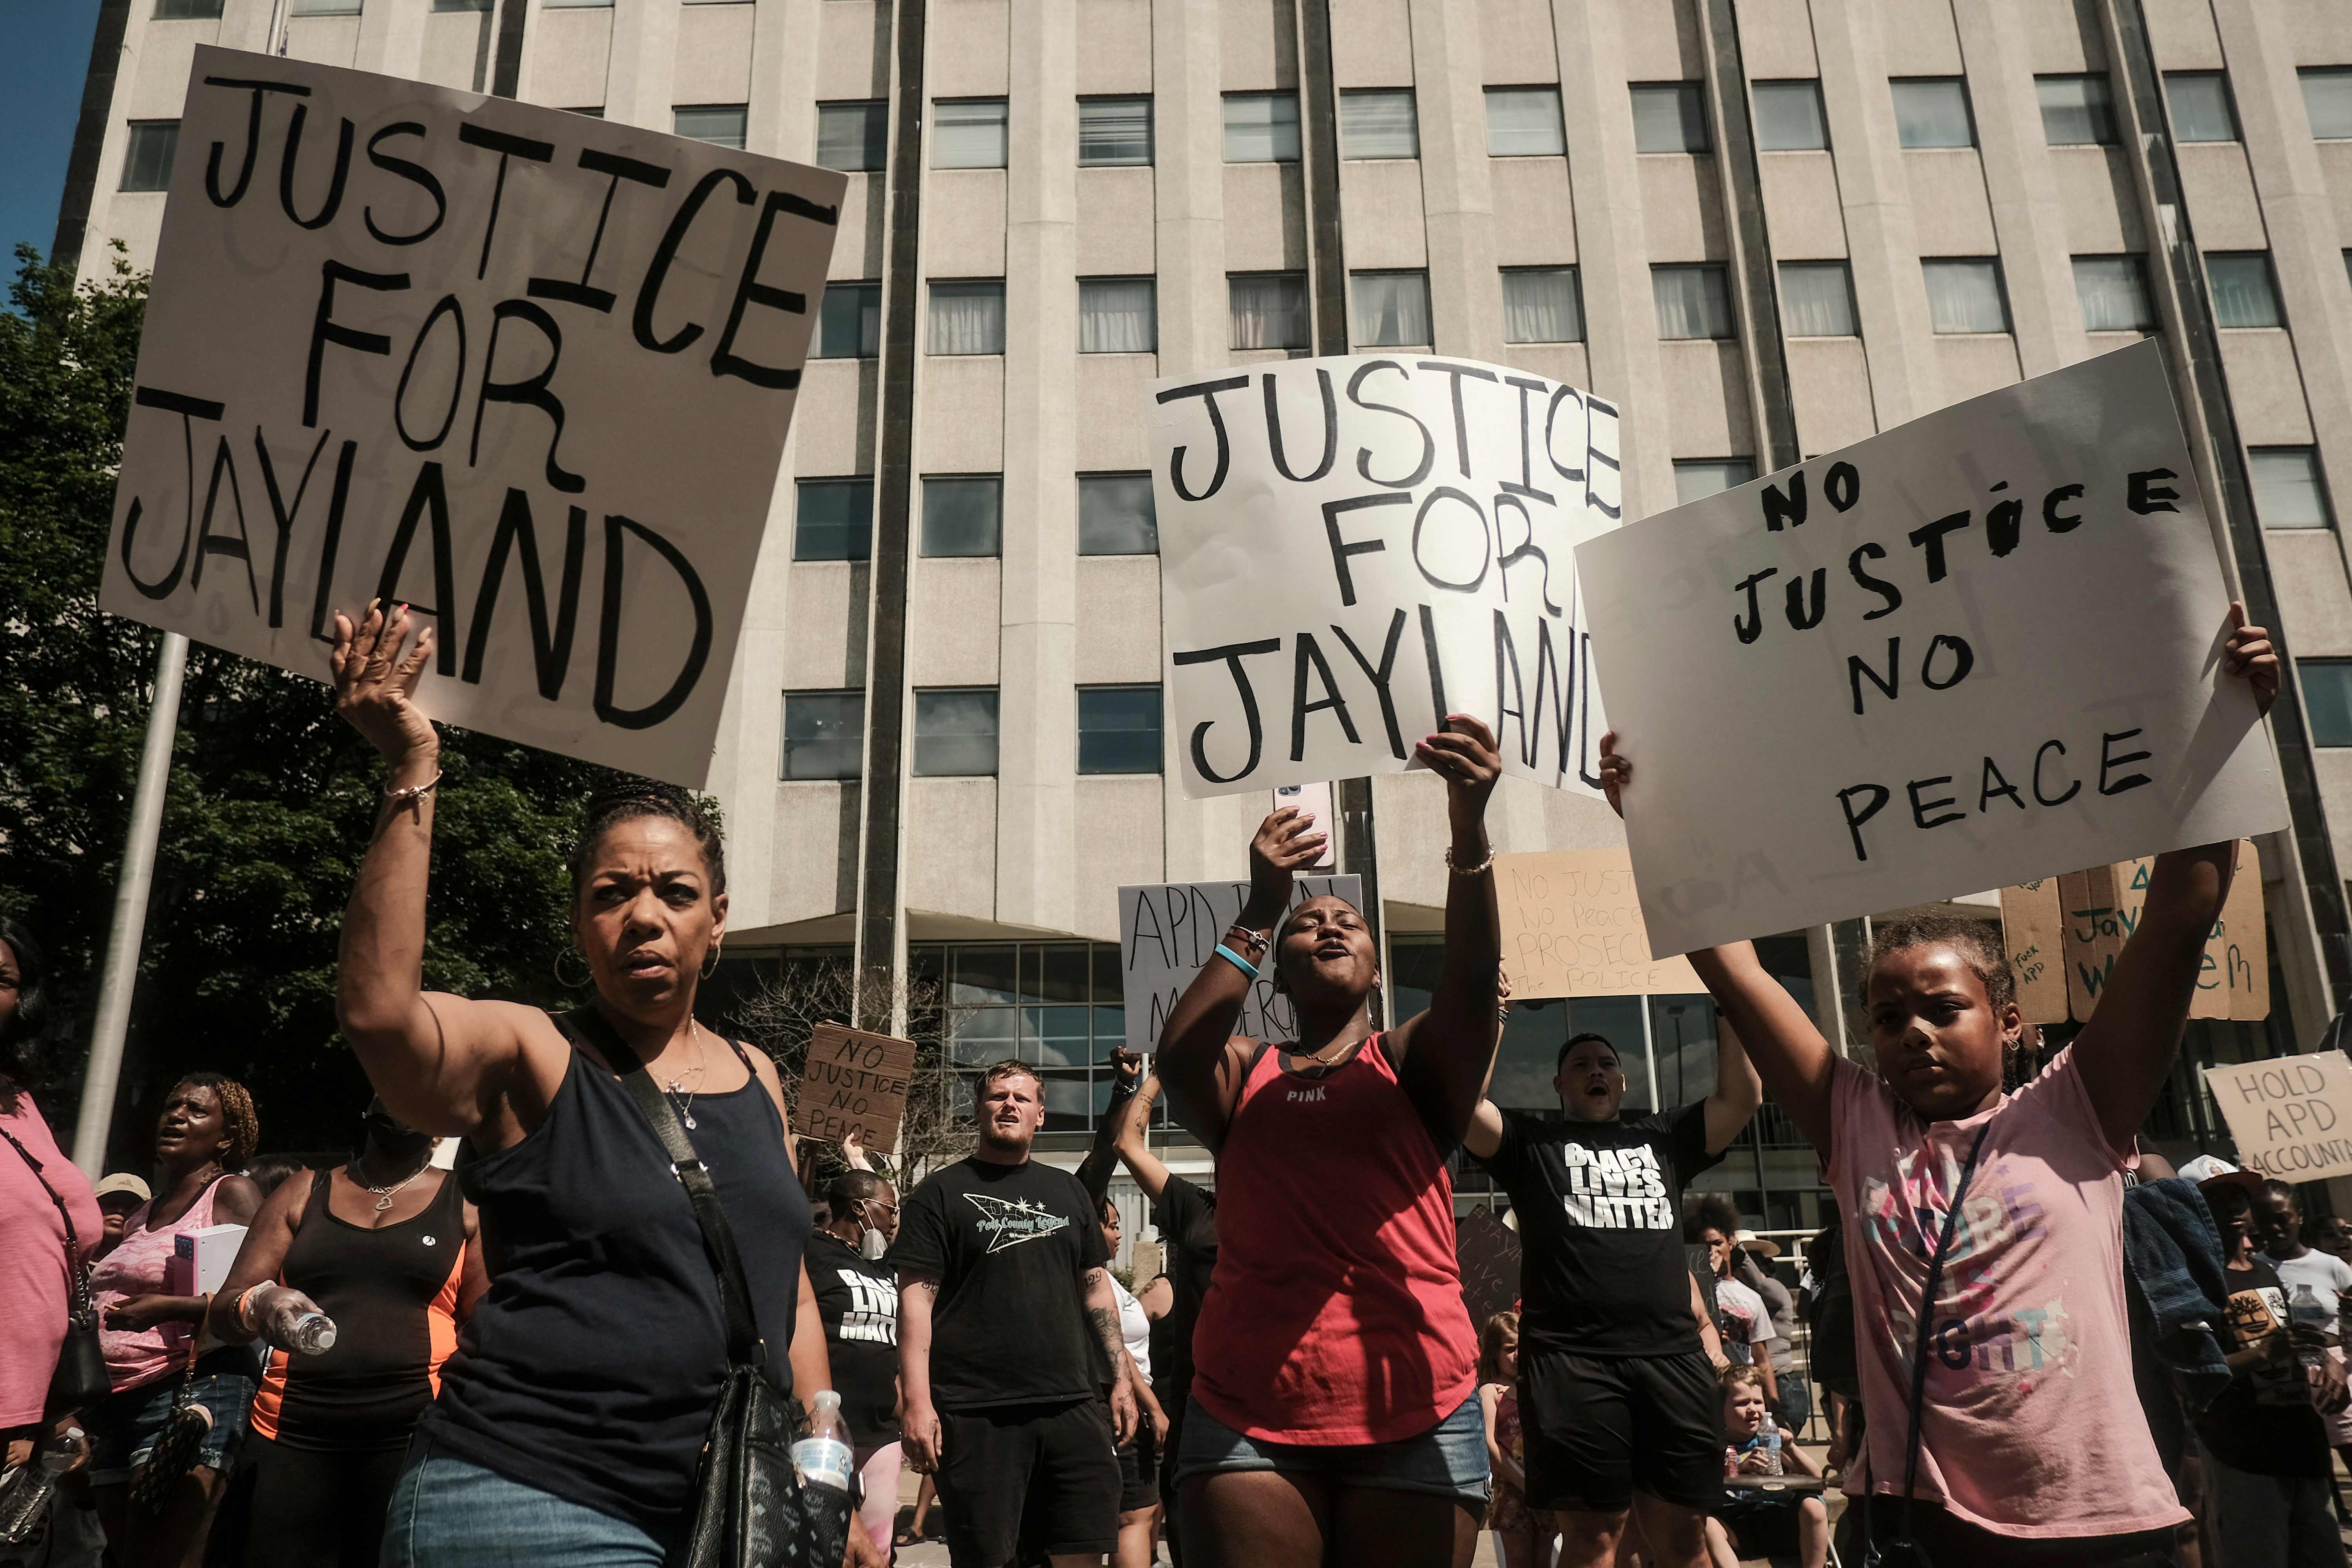 There have been protests in the US since the death of Jayland Walker